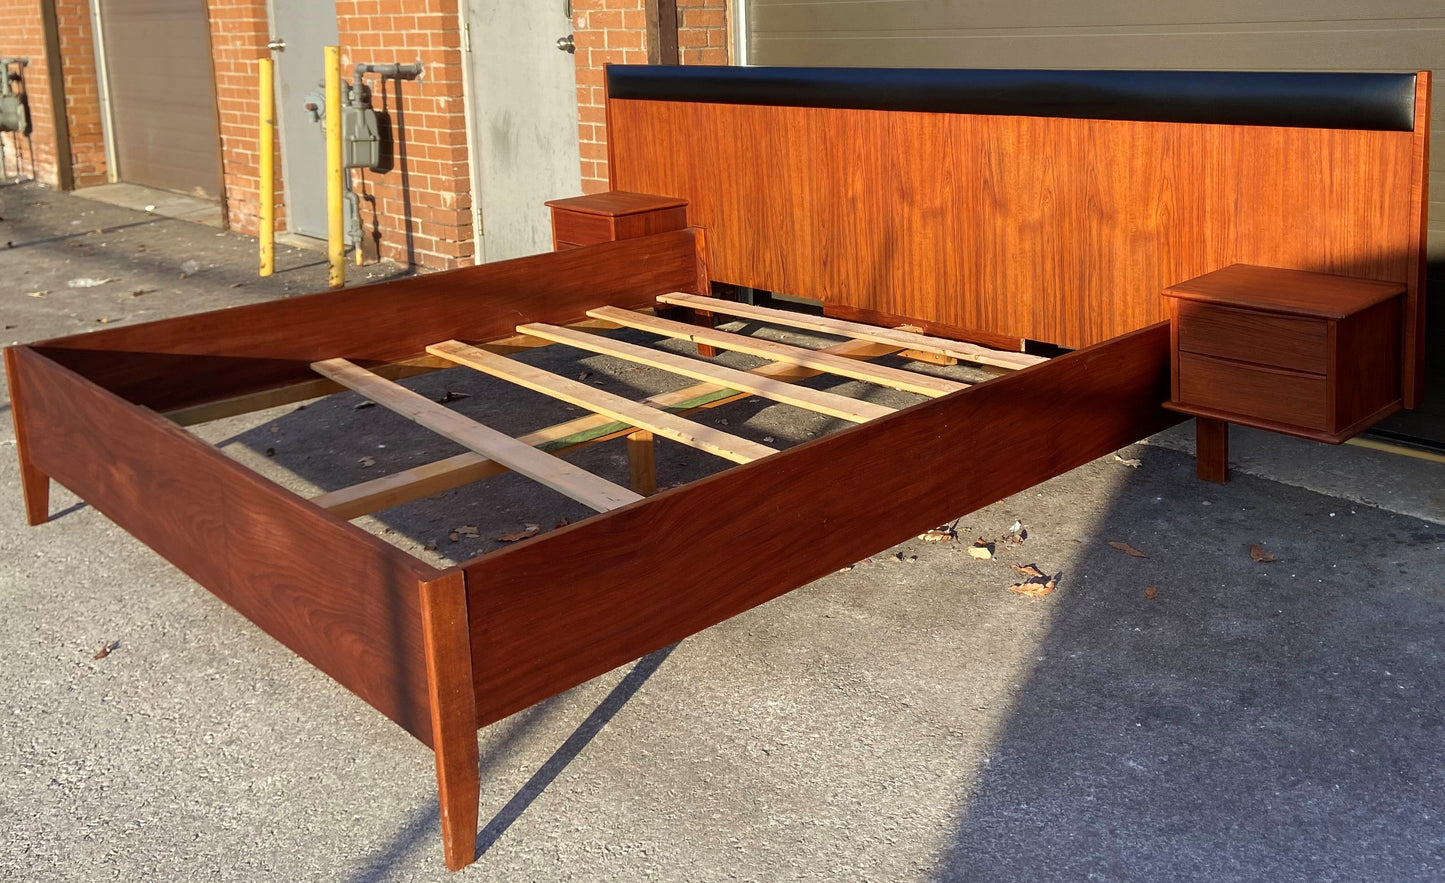 REFINISHED Danish MCM Teak Bed King w Floating Nightstands, PERFECT